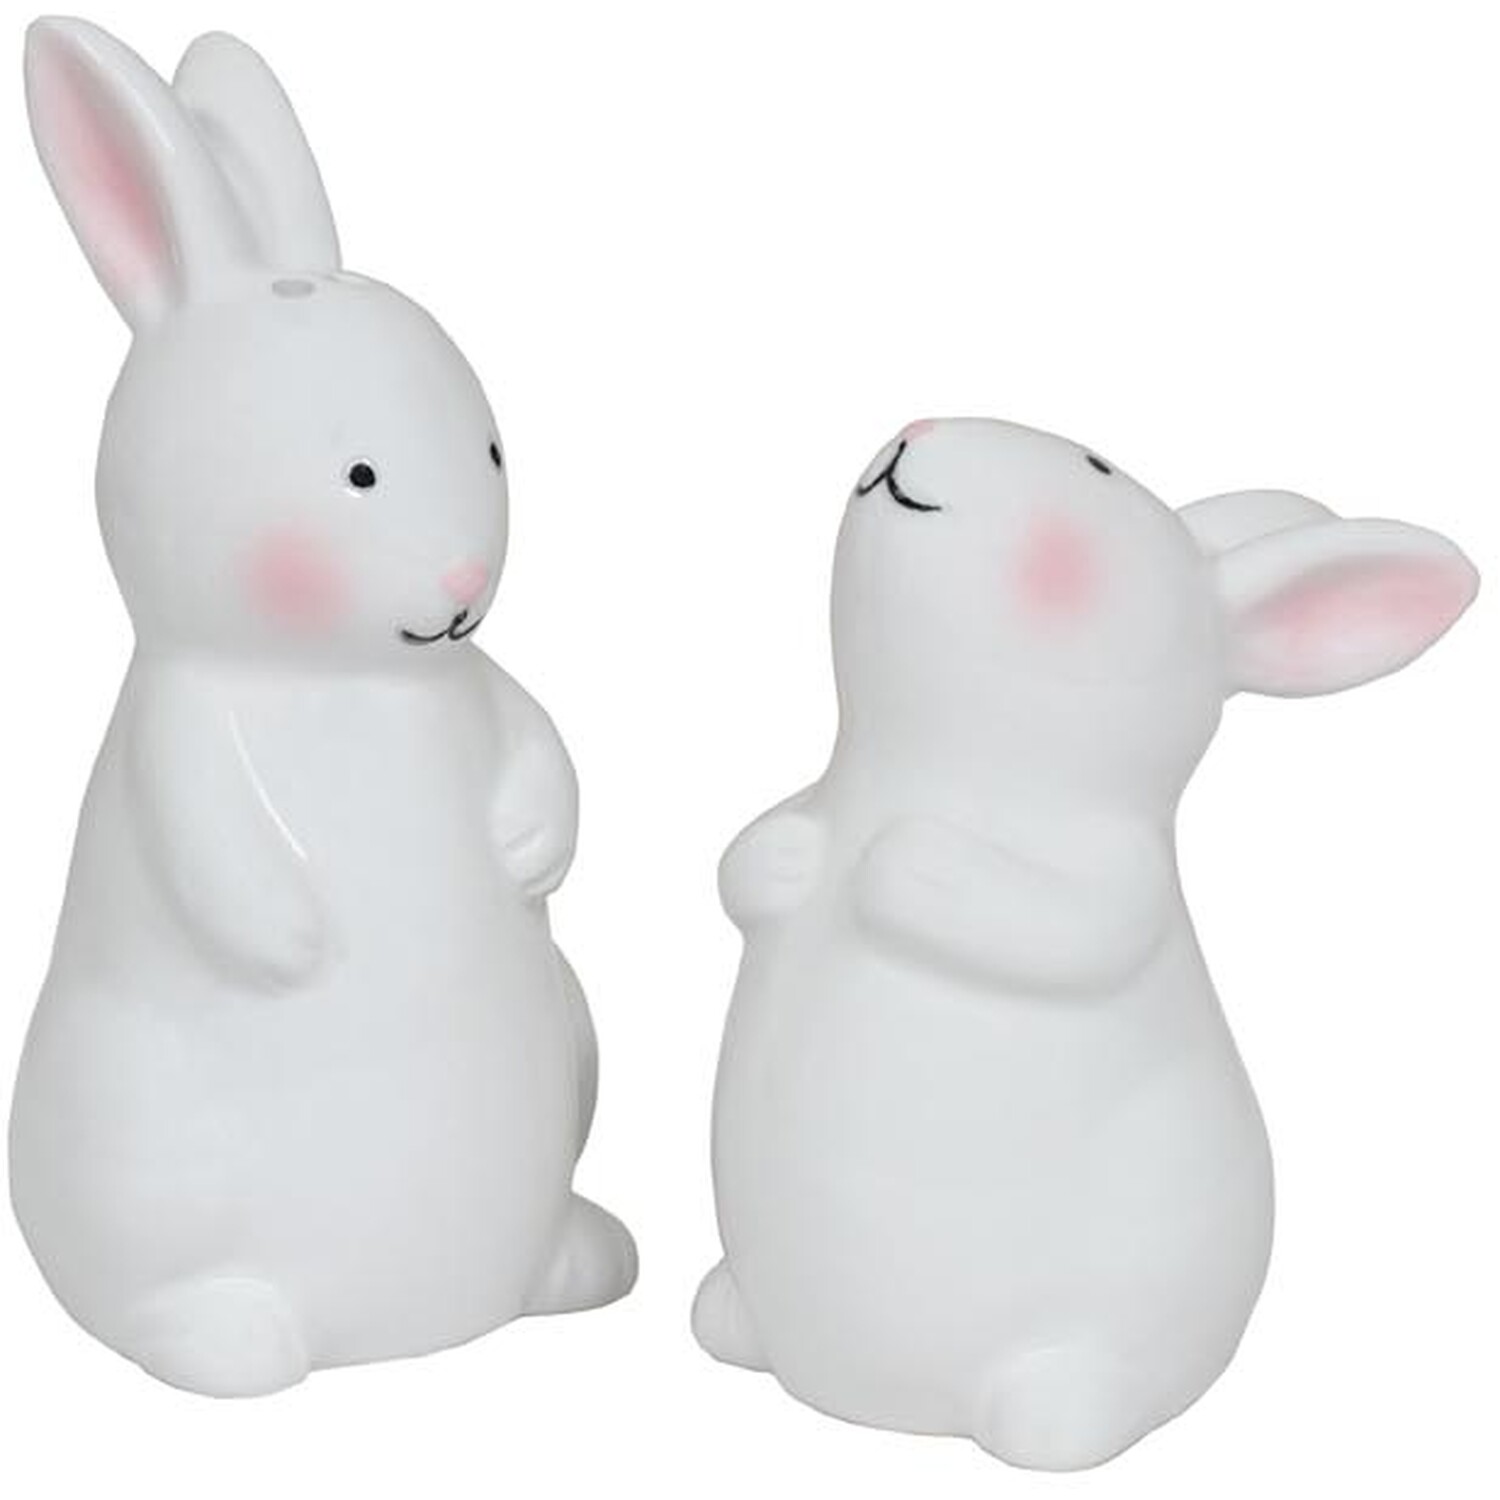 Bunny Salt and Pepper Shakers - White Image 2